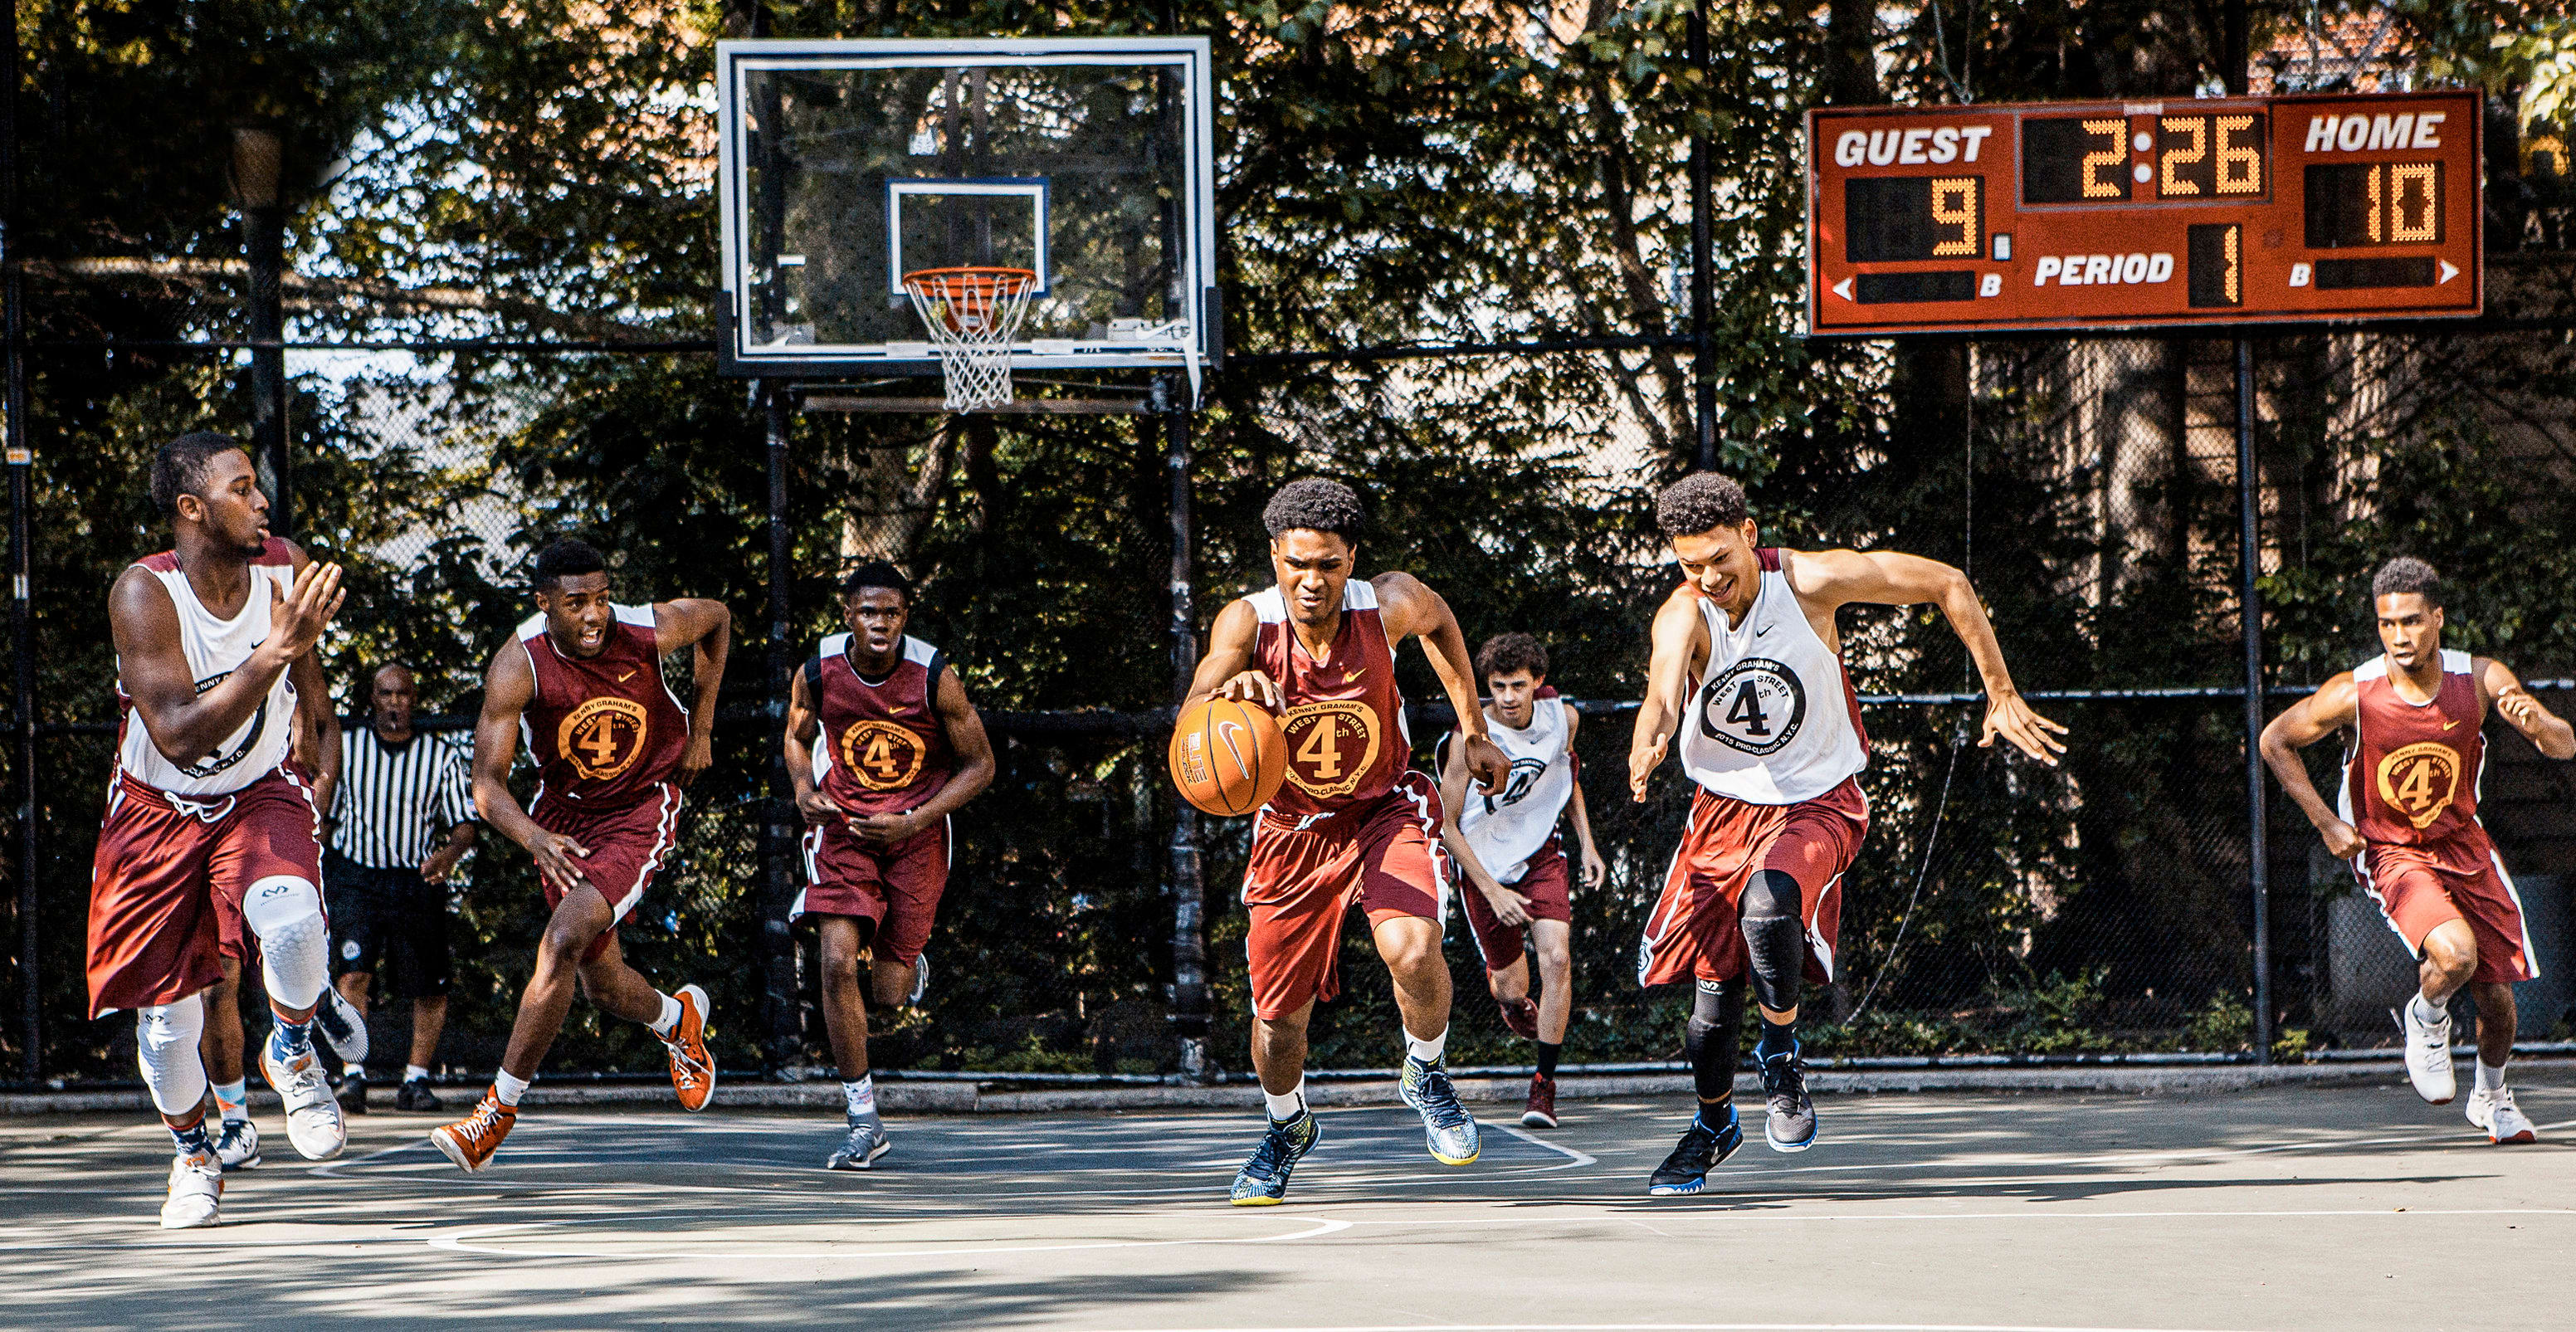 Yes, There Are Watches At NYC Basketball Courts.